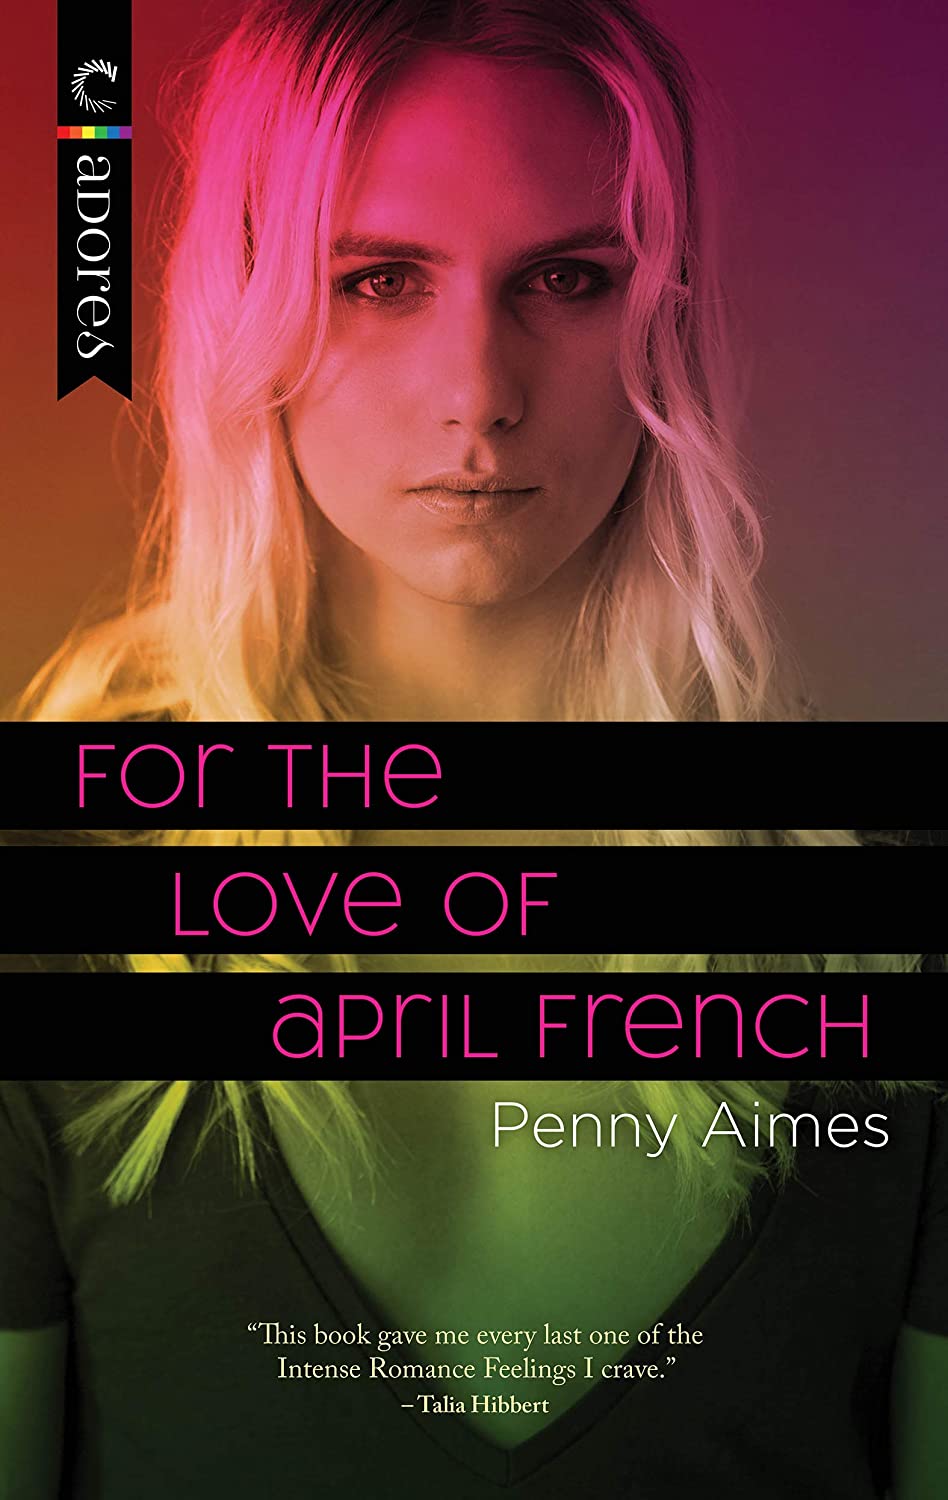 For the Love of April French by Penny Aimes